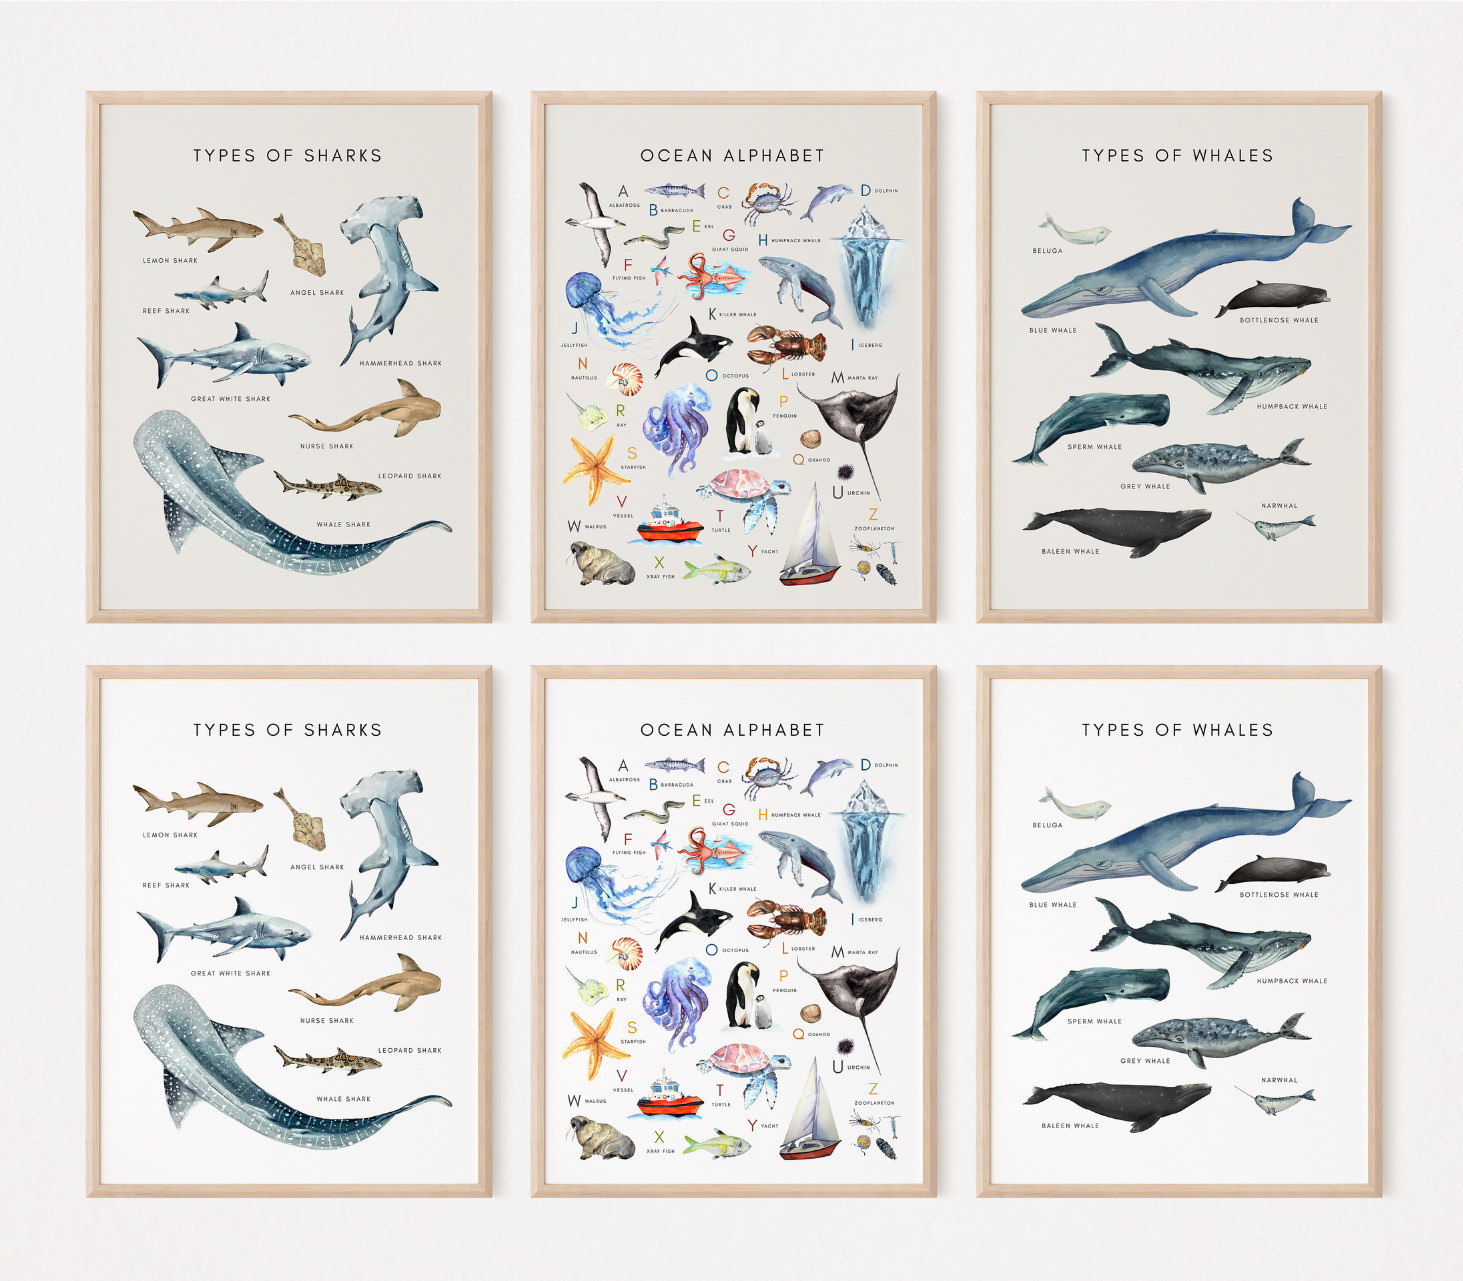 Educational Posters - Types of Whales, Types of Sharks, and Ocean Alphabet Poster